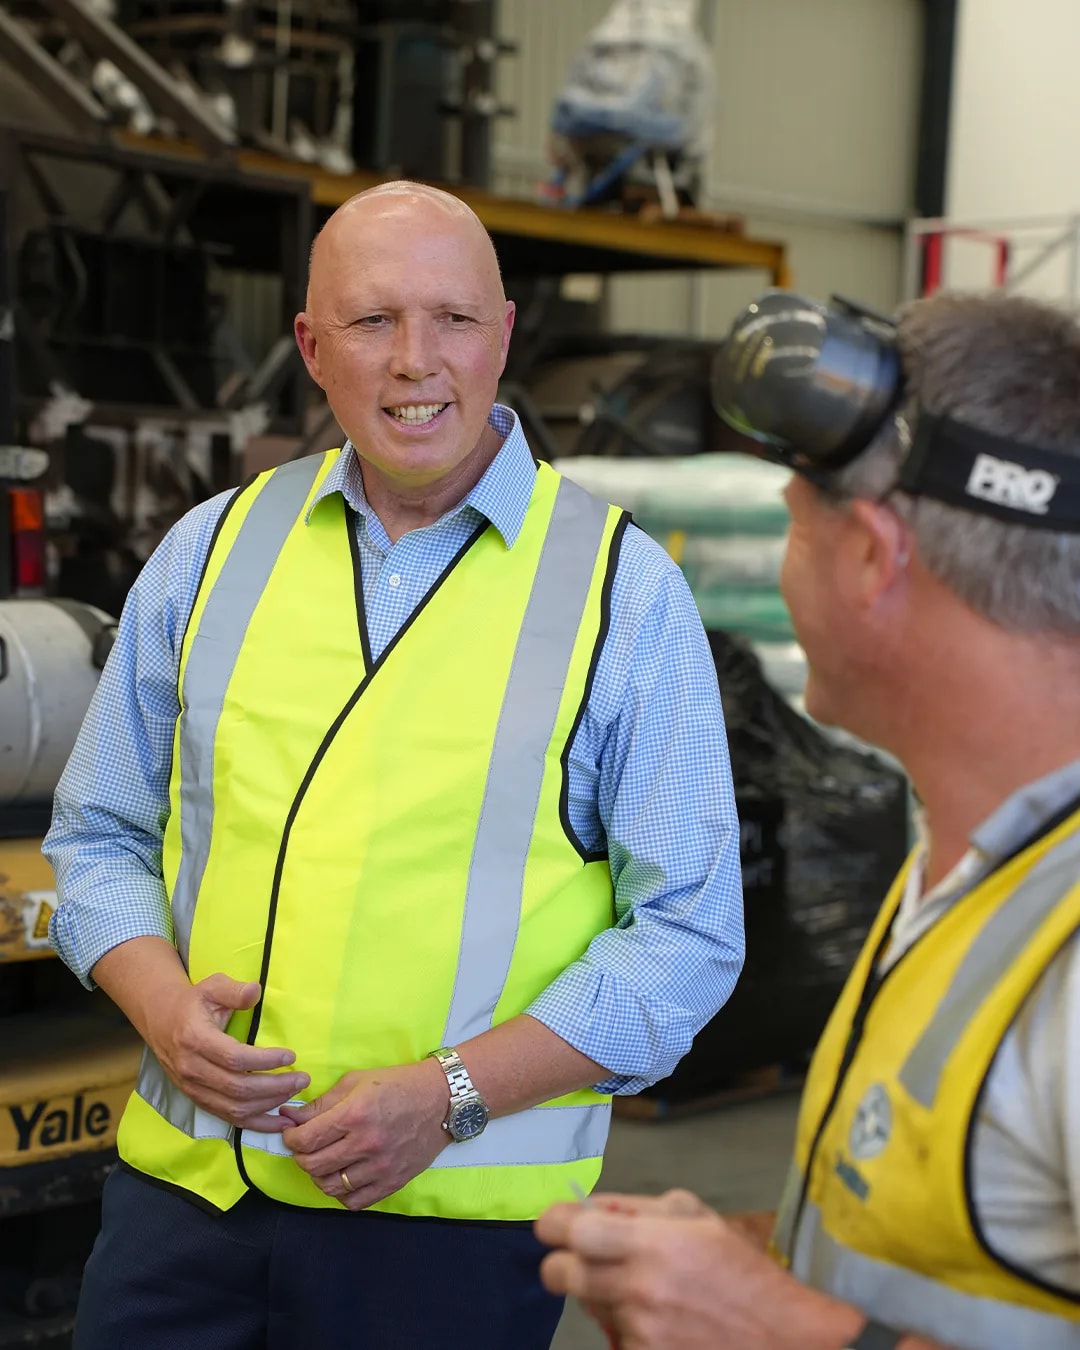 Peter Dutton: A great local success story. Sealite in Somerville is manufacturi…